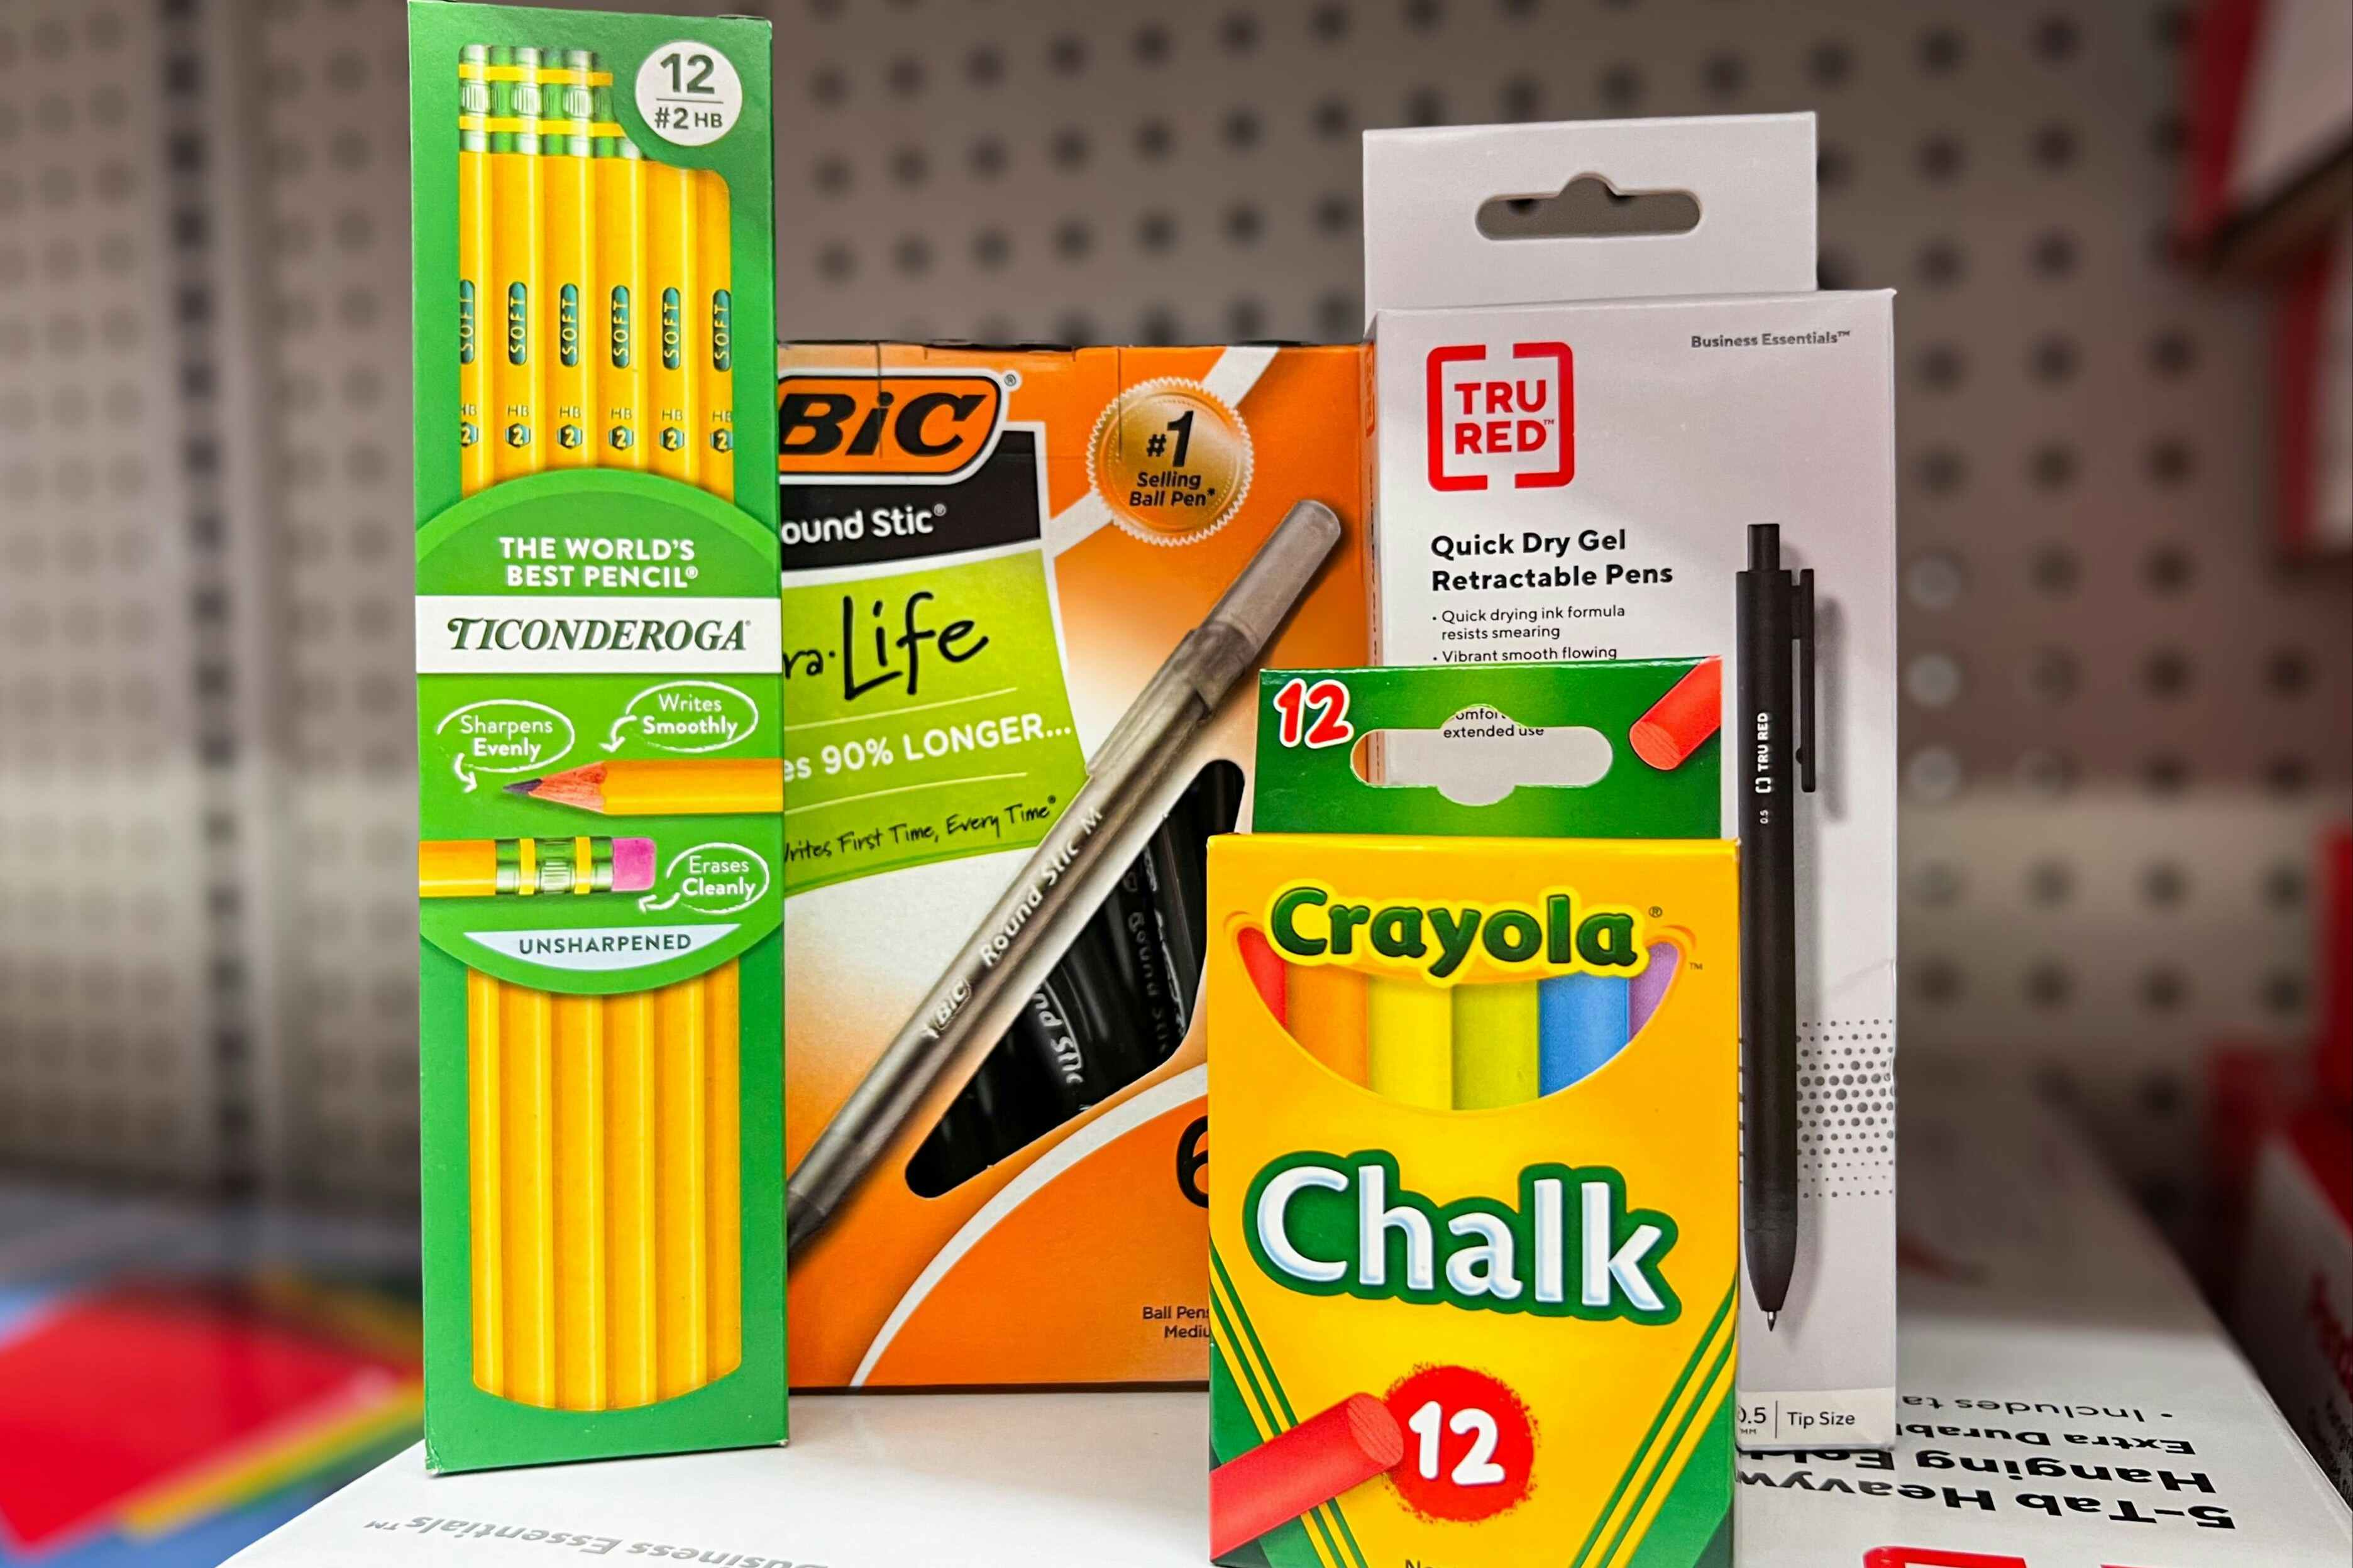 School Supplies Clearance Sale at Staples: Sharpie, Crayola, and More